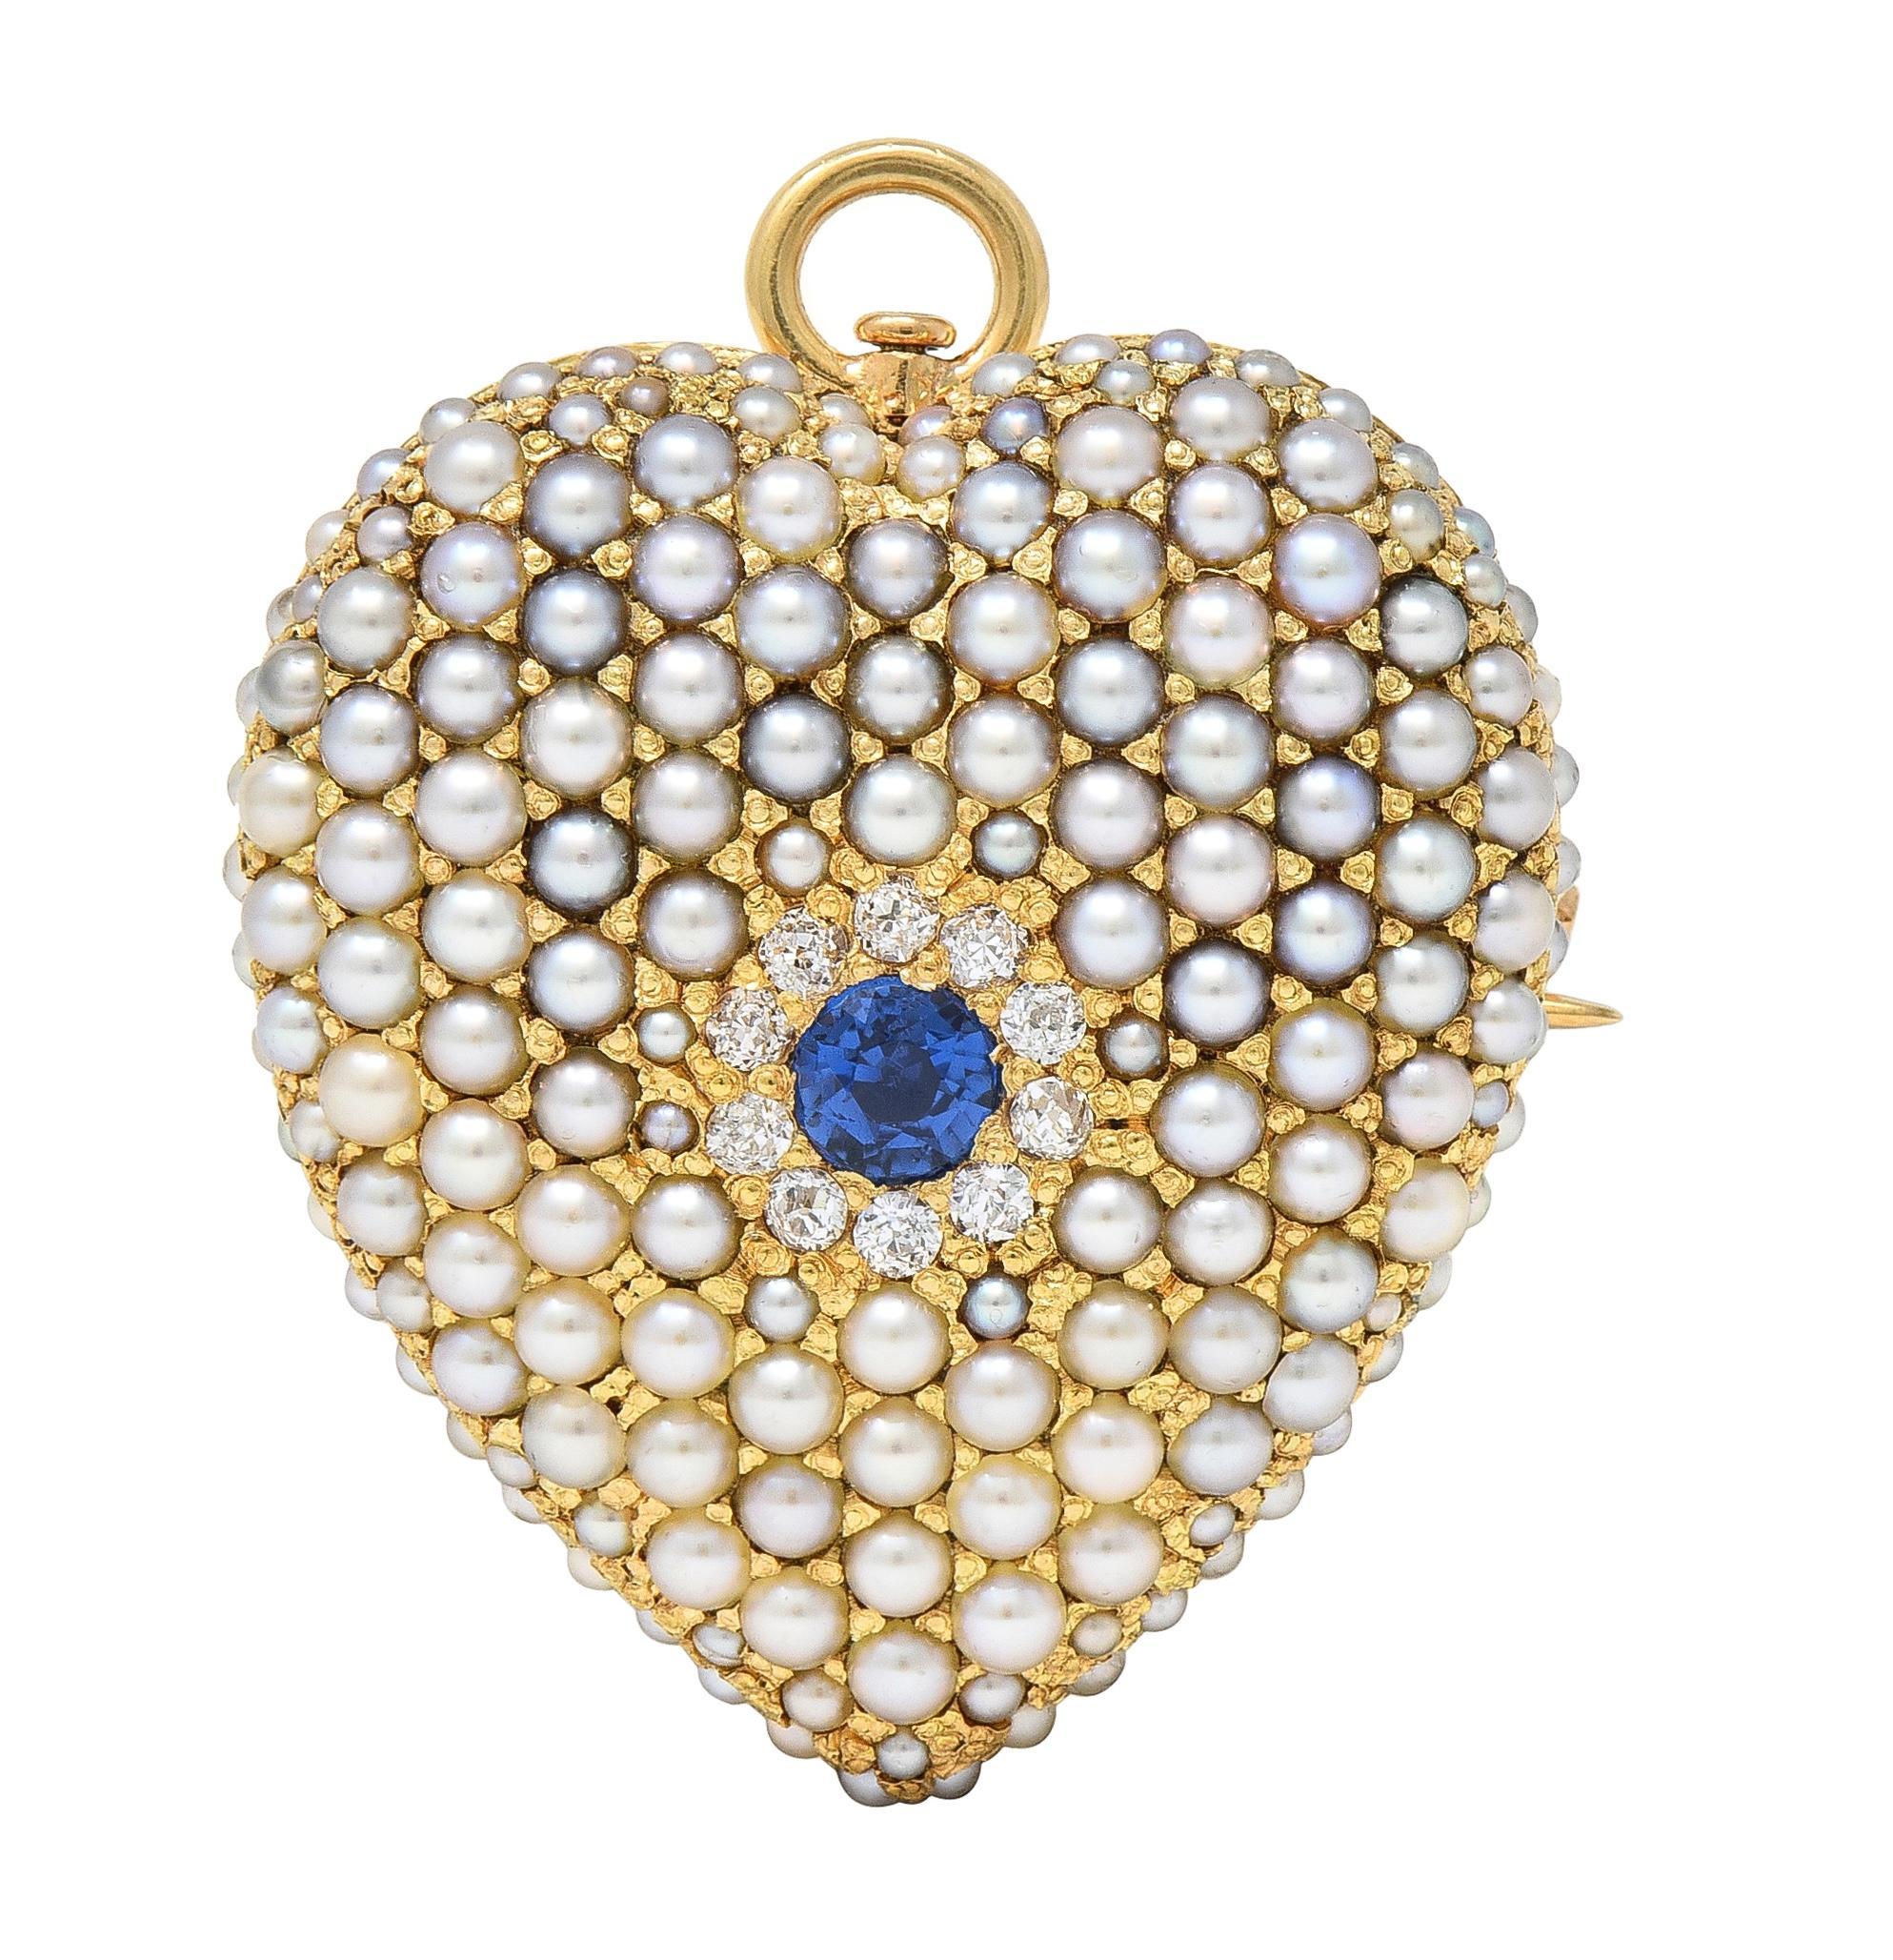 Designed as a puffed heart form centering a round cut sapphire weighing approximately 0.20 carat
Transparent medium blue in color with a halo surround of old European cut diamonds 
Weighing approximately 0.20 carat total - eye clean and bright 
Bead